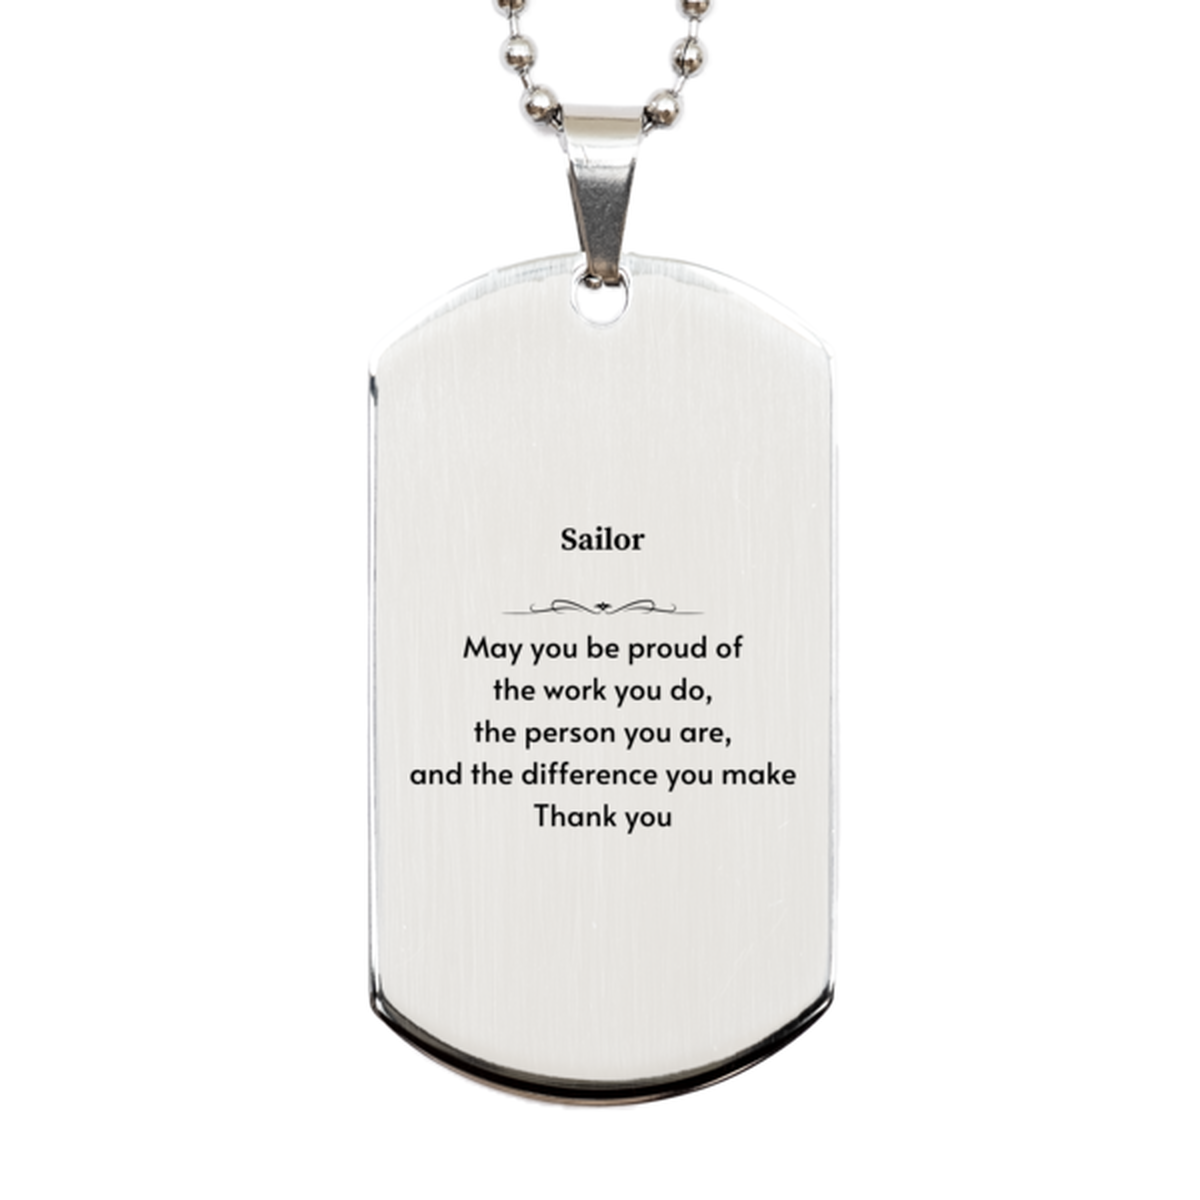 Heartwarming Silver Dog Tag Retirement Coworkers Gifts for Sailor, Sailor May You be proud of the work you do, the person you are Gifts for Boss Men Women Friends